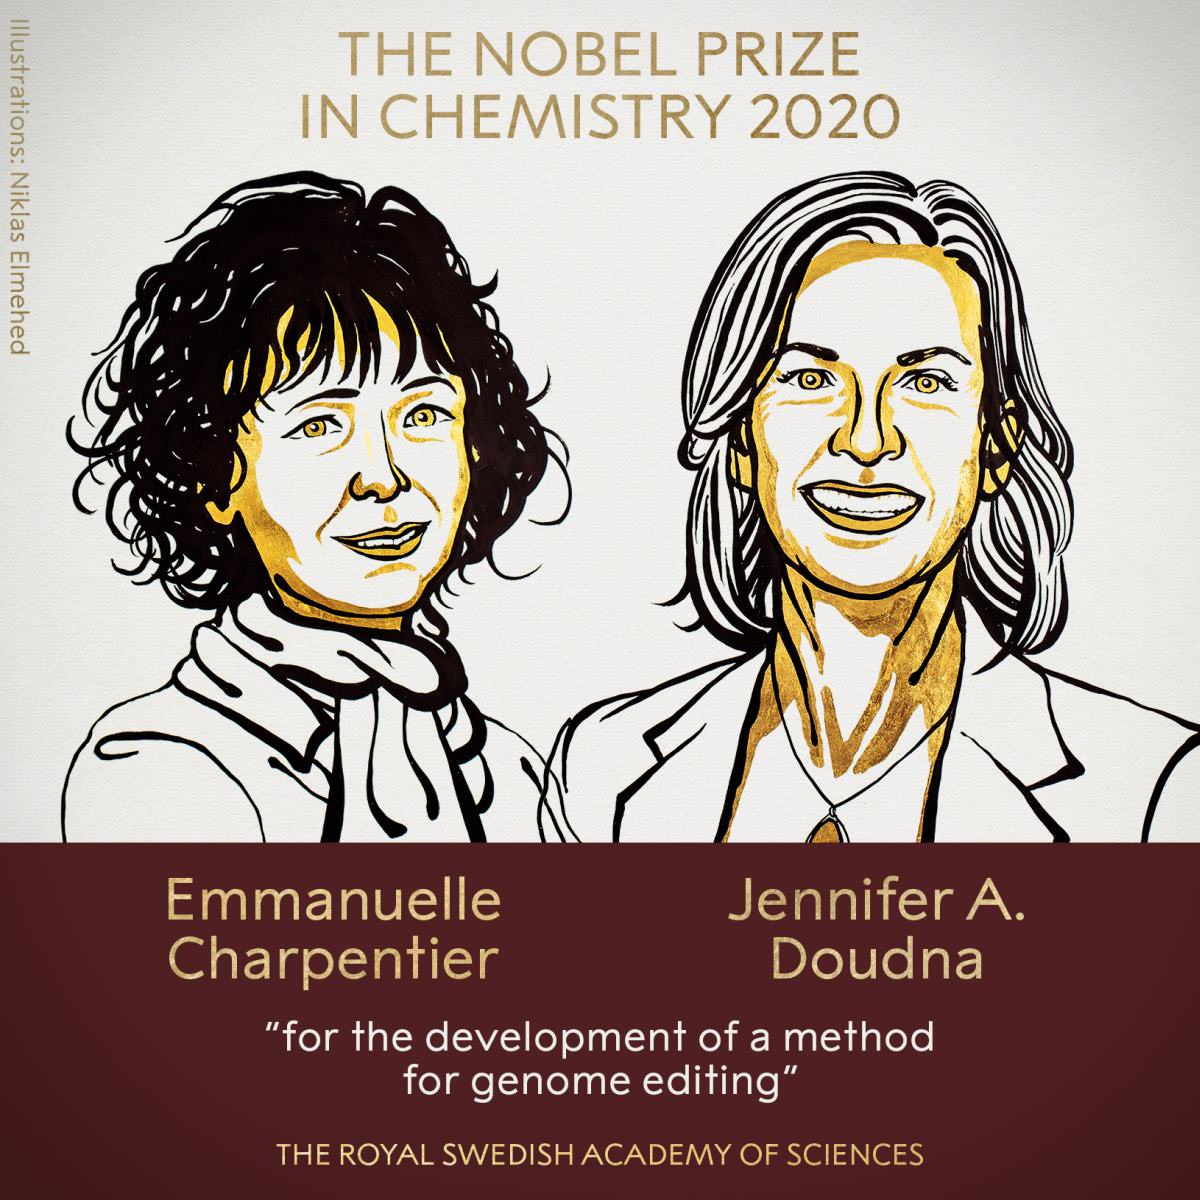 Emmanuelle-Charpentier-and-Jennifer-Doudna-Win-Nobel-Prize-in-Chemistry-2020-for-Gene-Editing-Tool